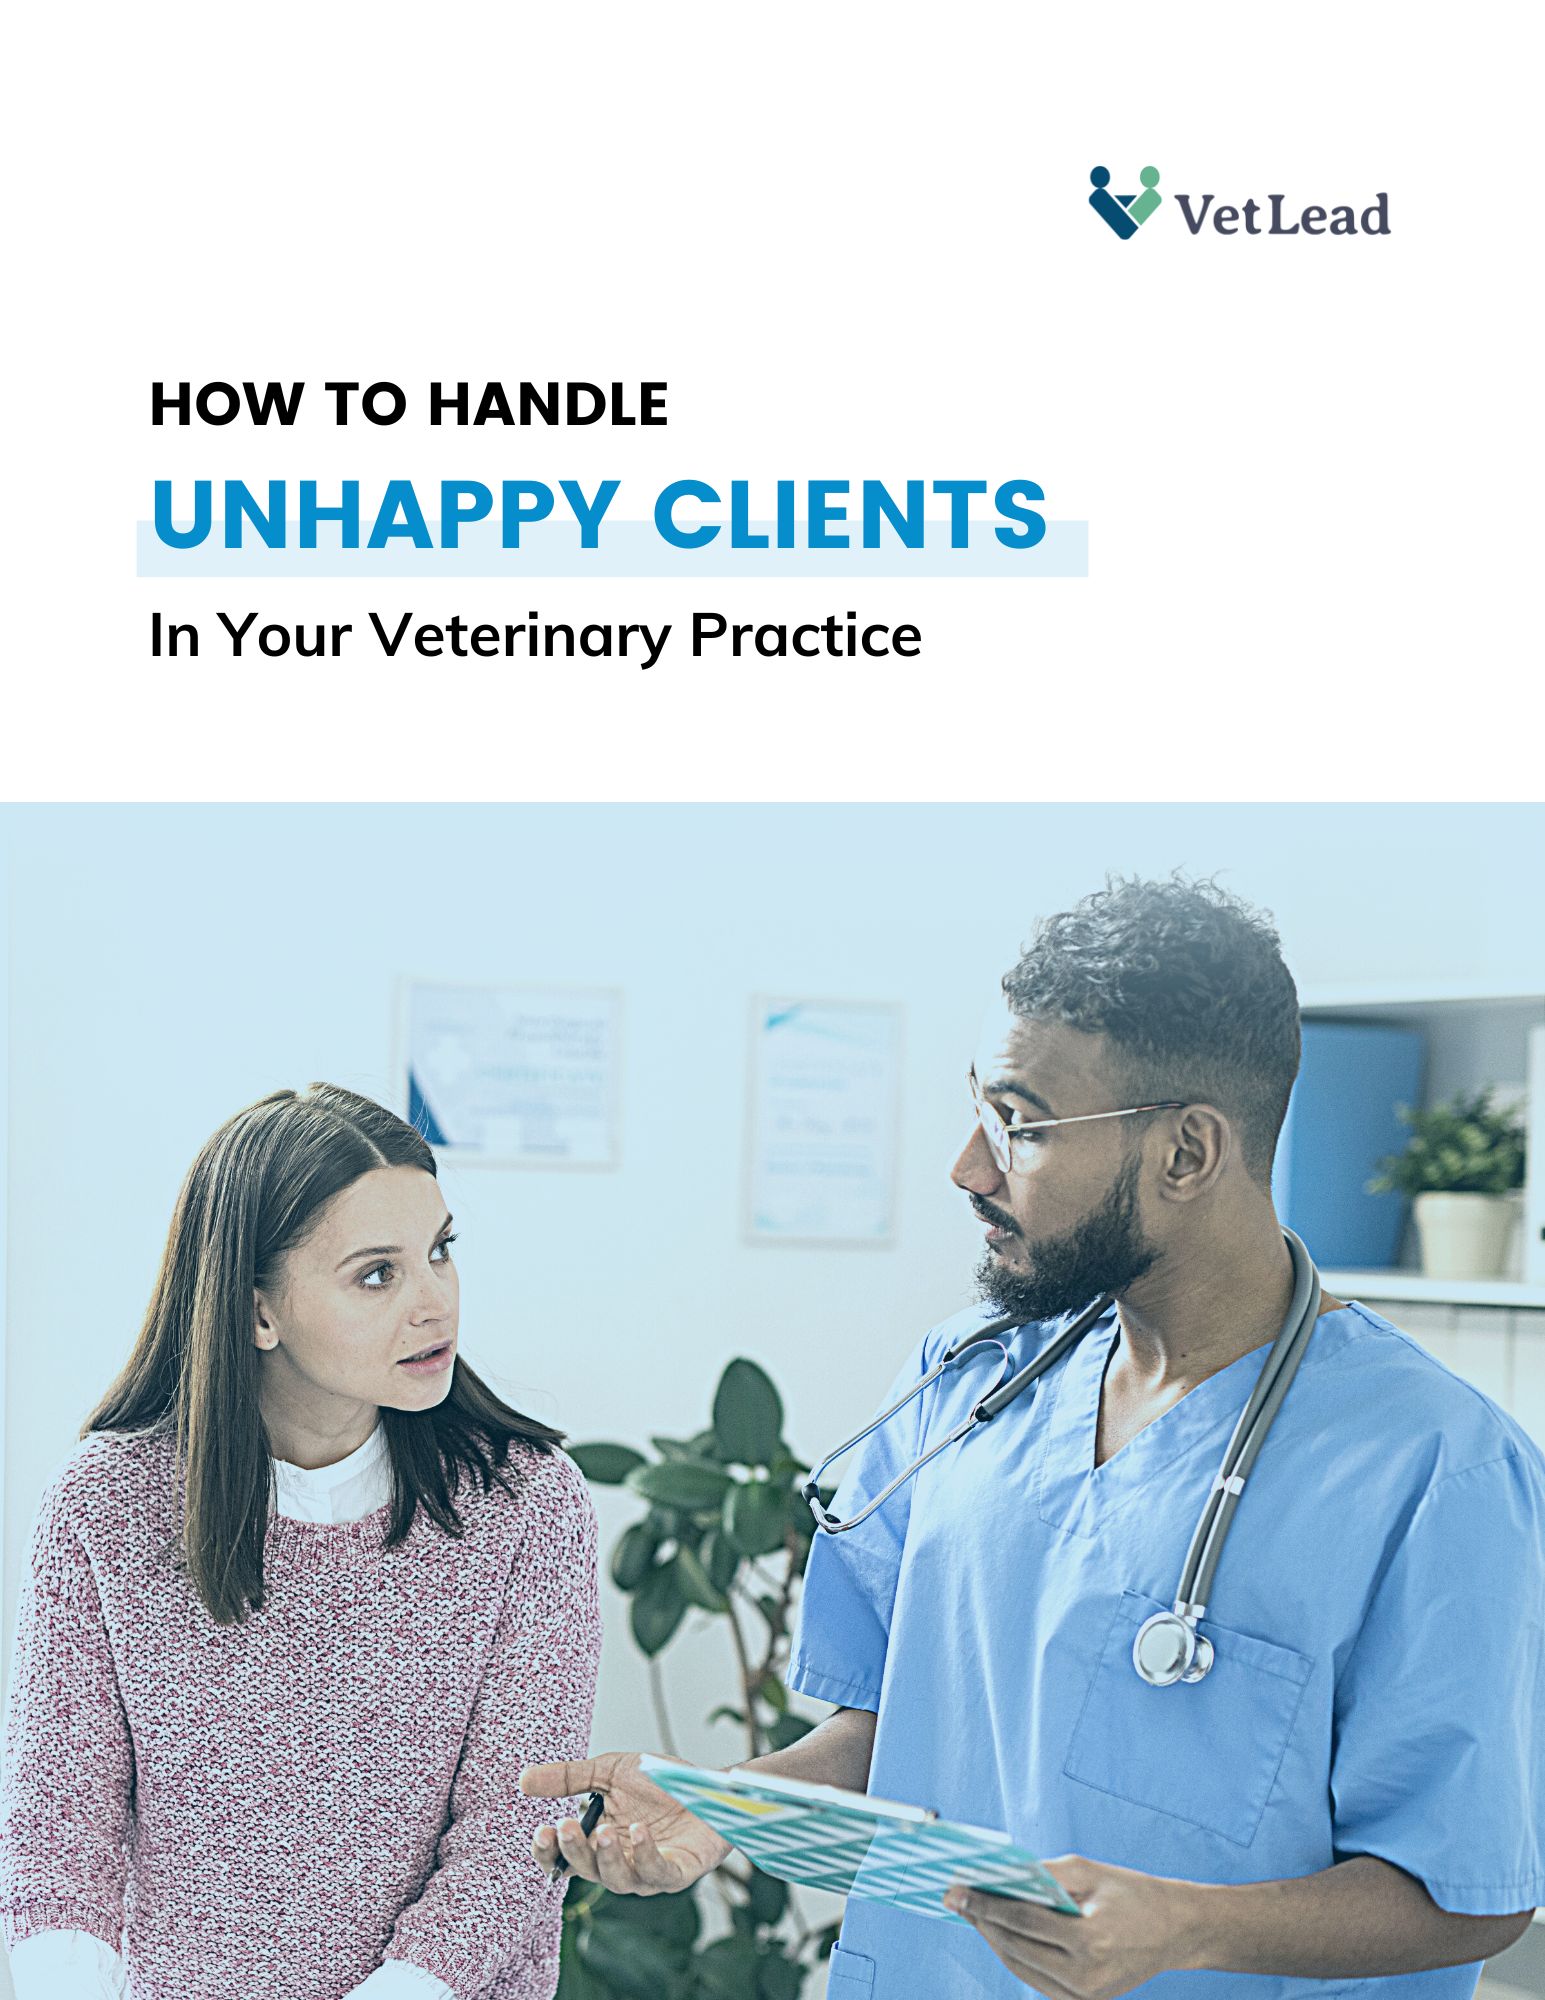 How to handle unhappy clients